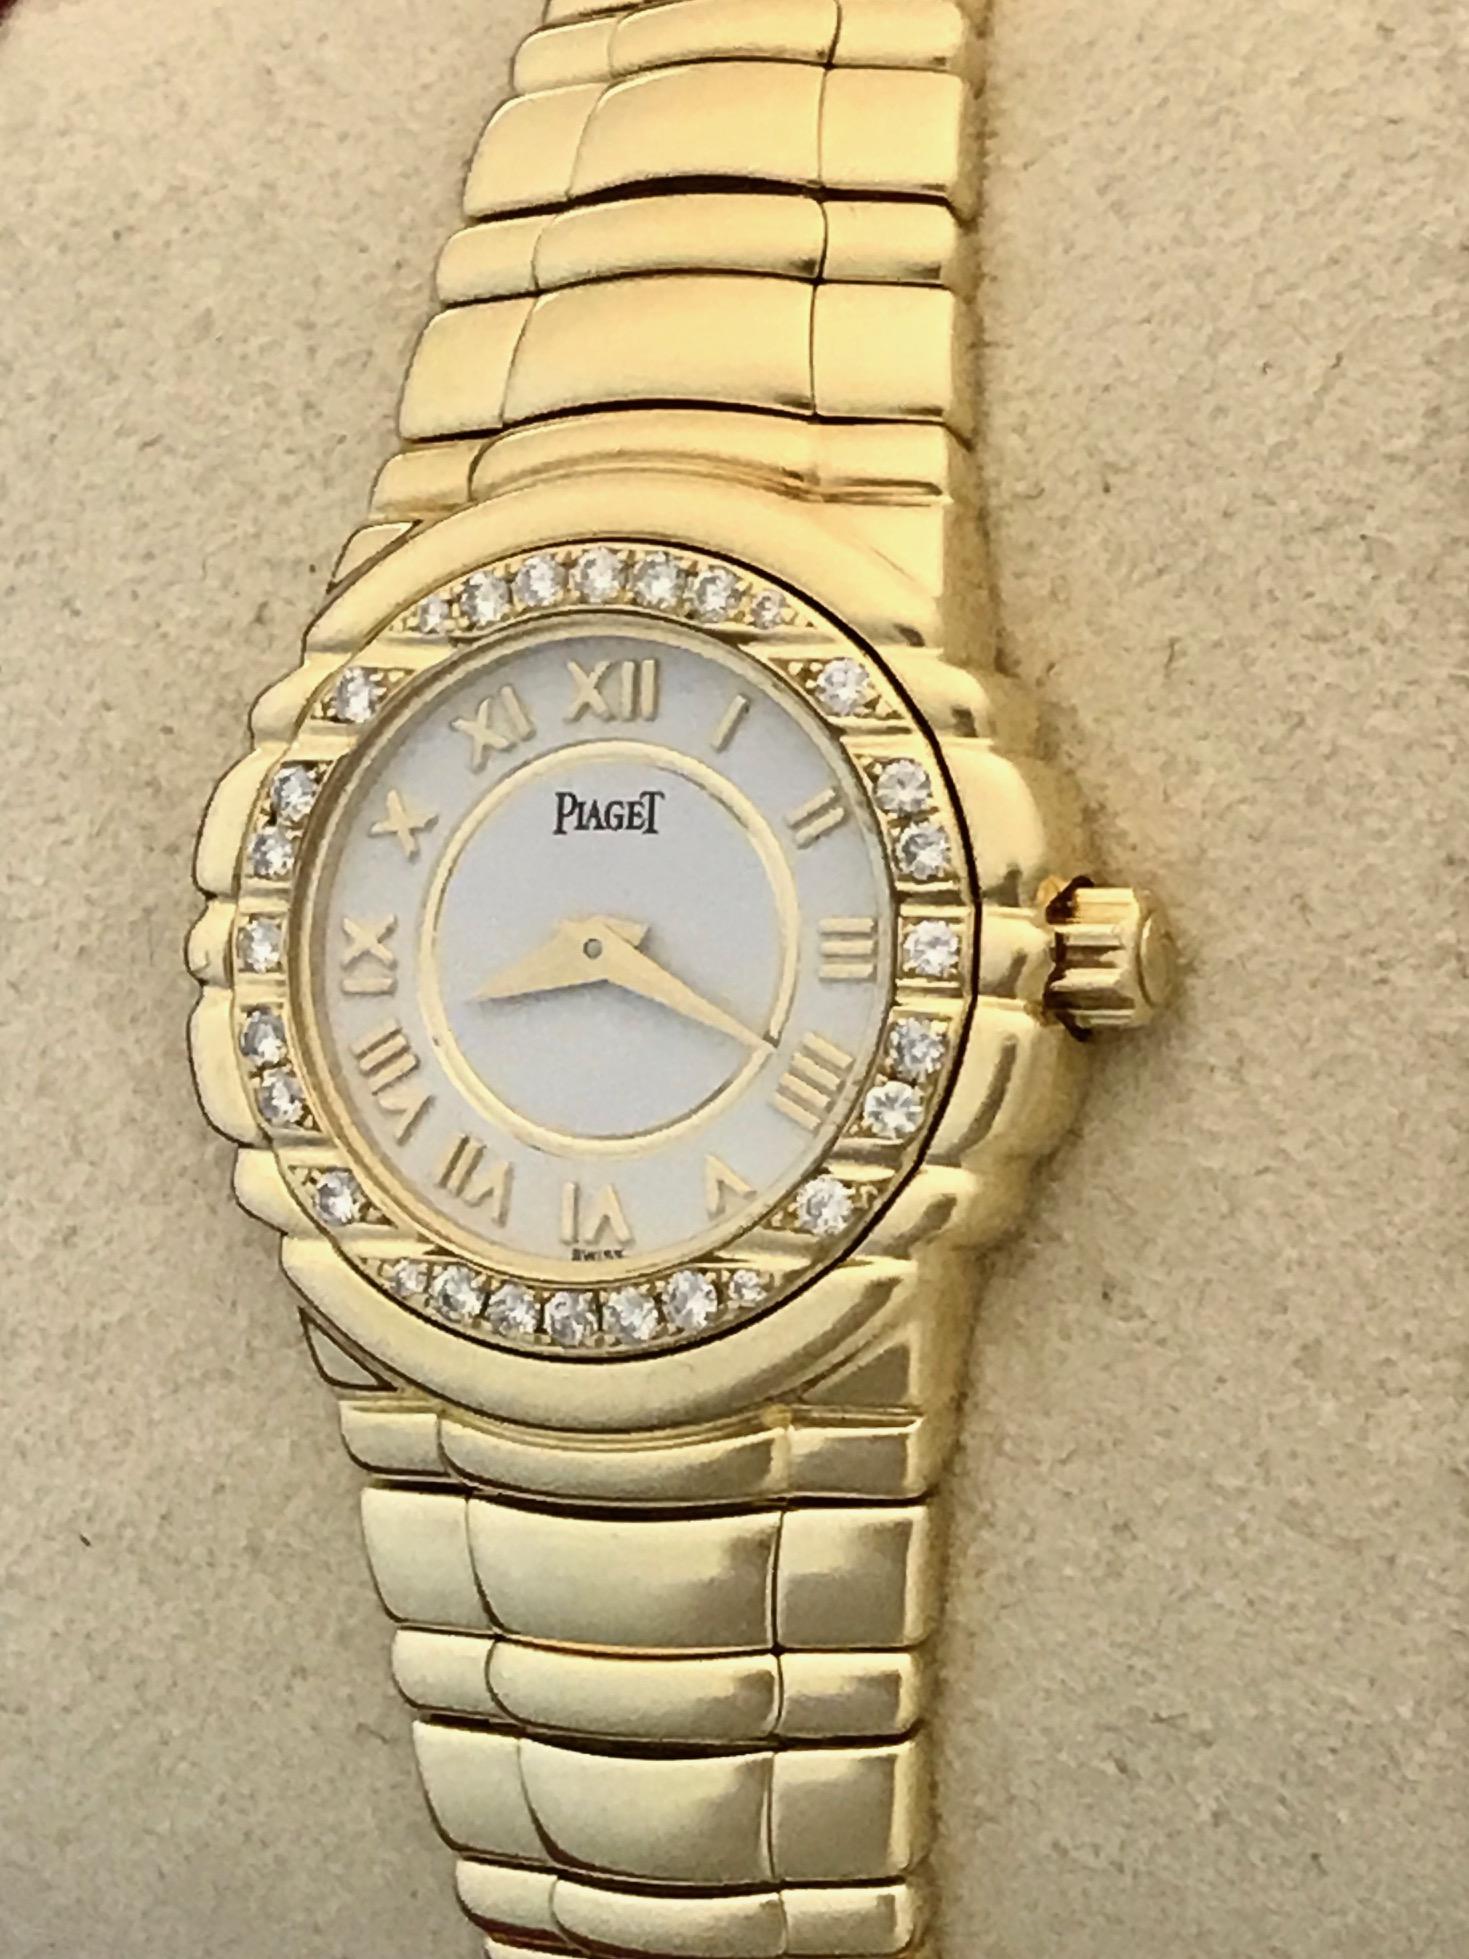 Stunning pre-owned ladies' Piaget Tanagra with factory Piaget diamond bezel and white dial with gold Roman numerals. White Dial with gold Roman numerals. 18k Yellow Gold integrated Piaget bracelet with deployant clasp. This watch is in beautiful